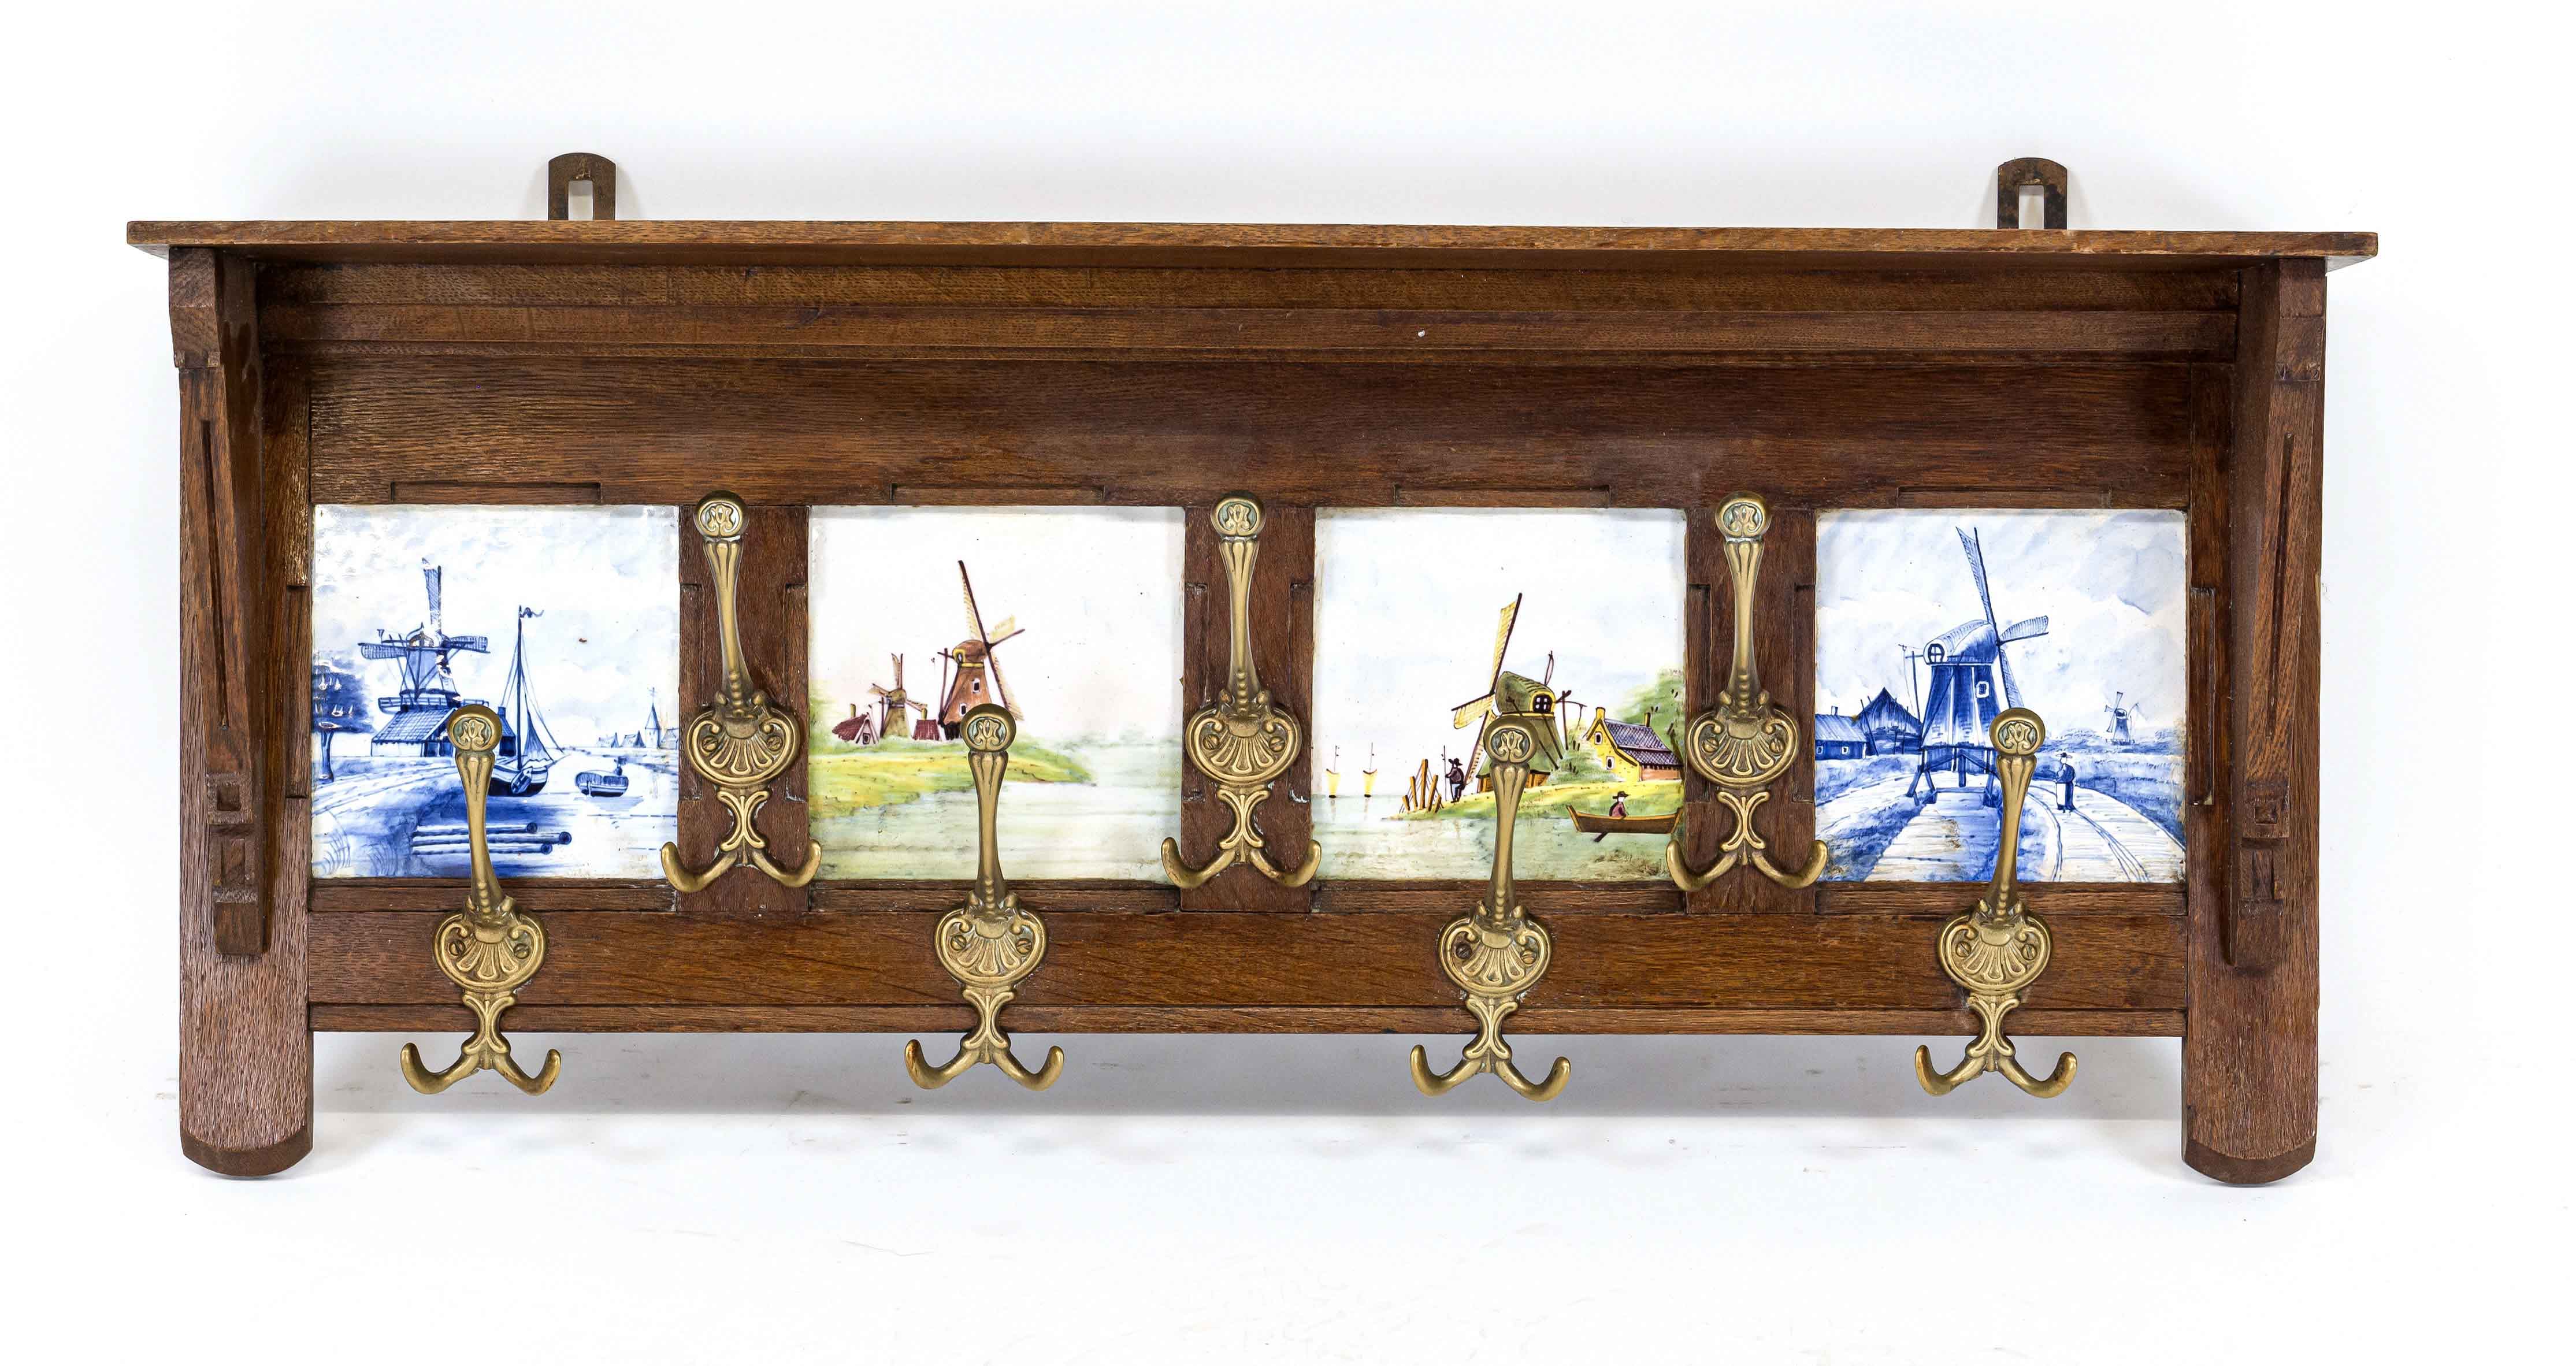 Wall coat rack around 1900, oak, four blue and polychrome tiles with windmills, 7 brass hooks, 38